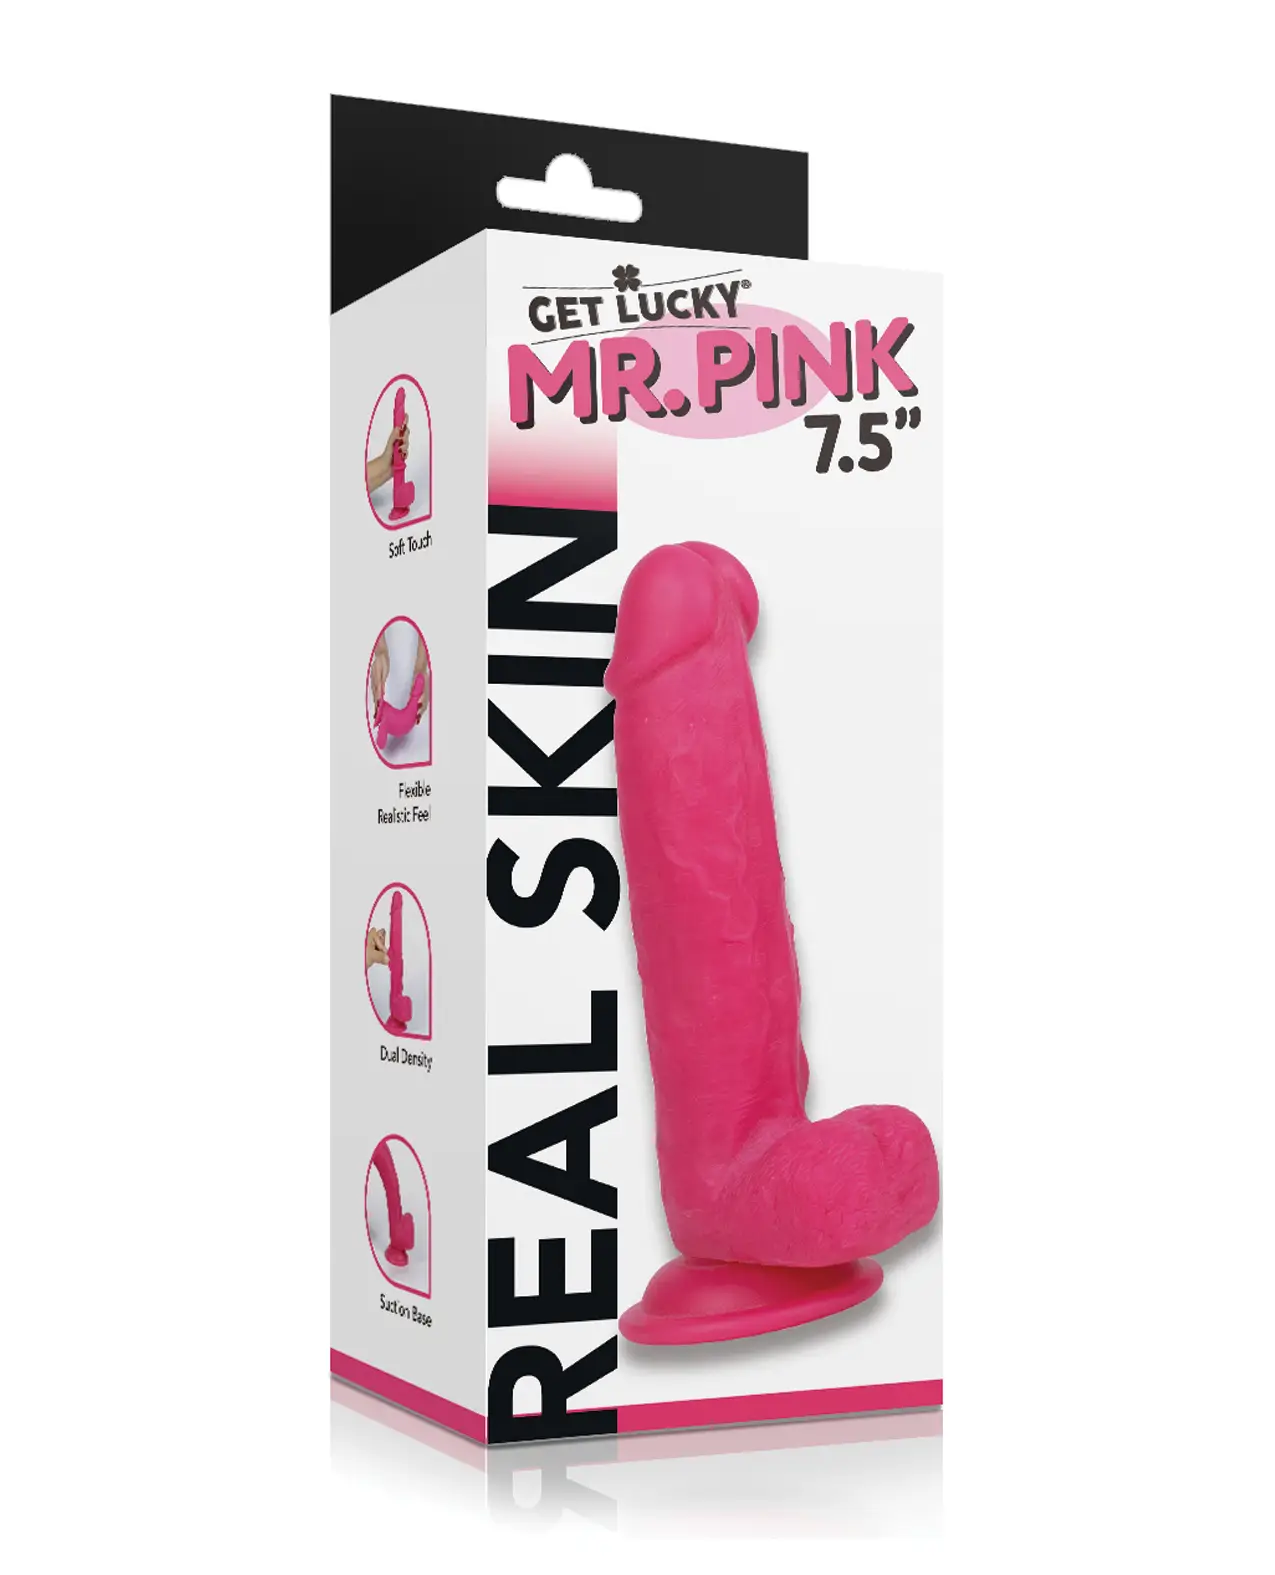 Get Lucky Mr. Pink 7.5" Dual Layer Dong. A Pink Realistic feeling dong on a white box.